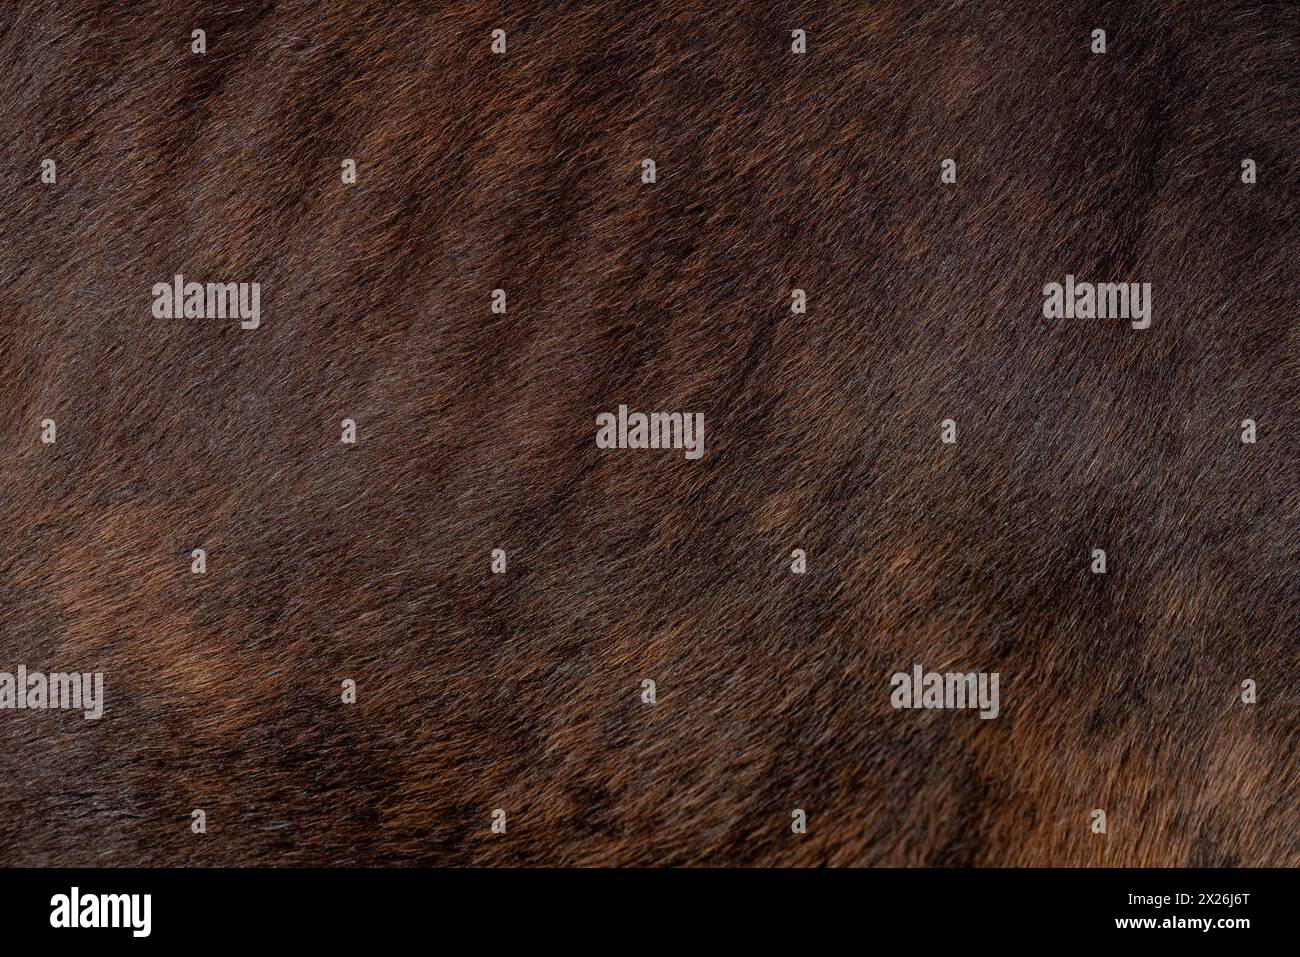 Background. Pattern. Extreme close-up of a dark brown horse s hair. Background. Pattern. Stock Photo